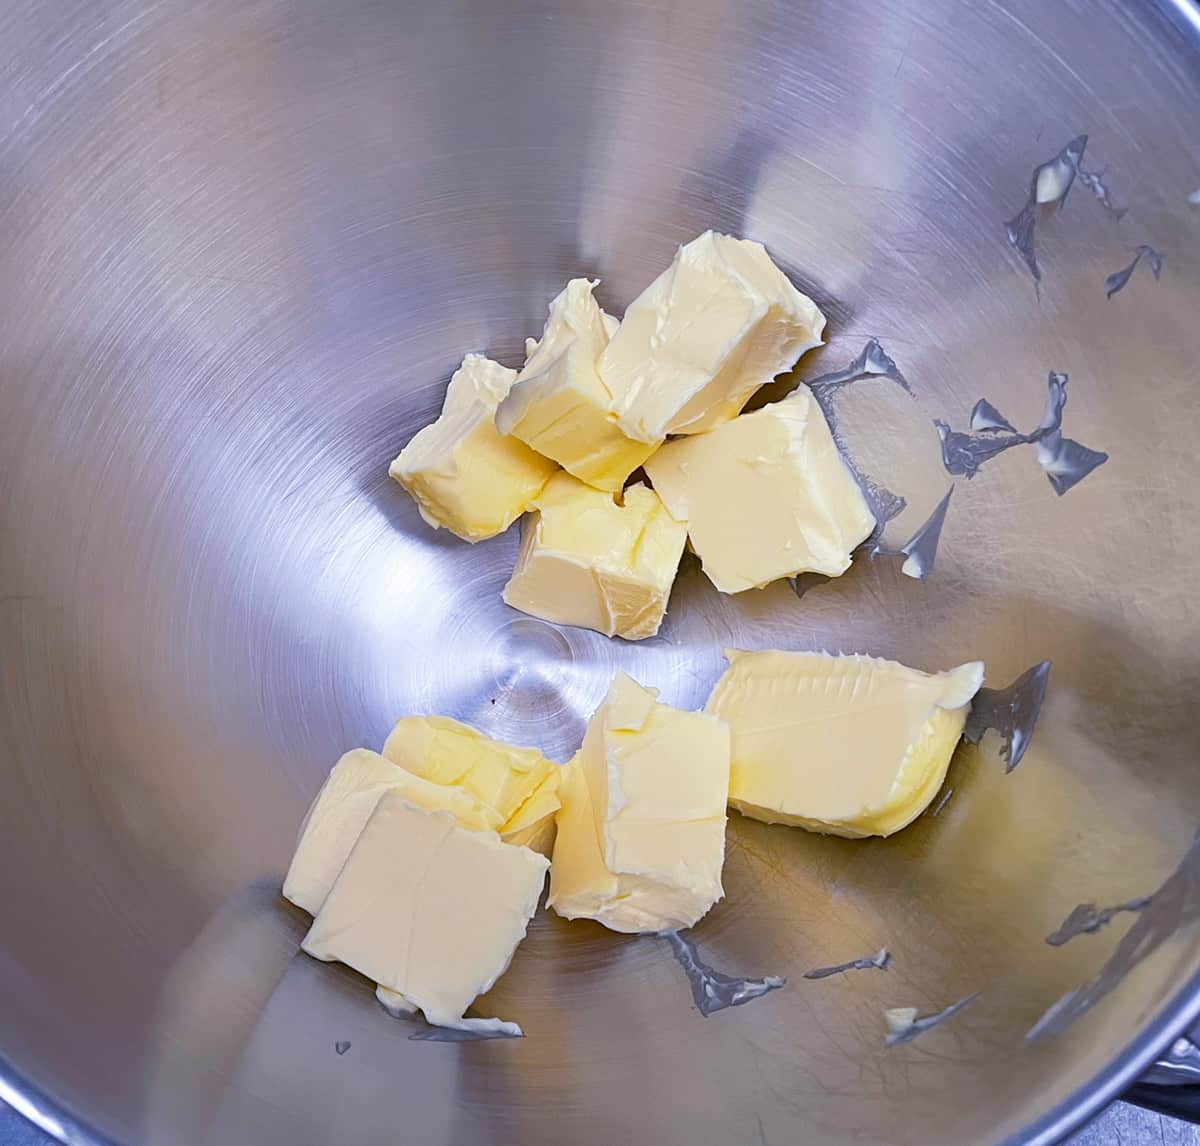 Butter cut into pieces and added to a mixer bowl.